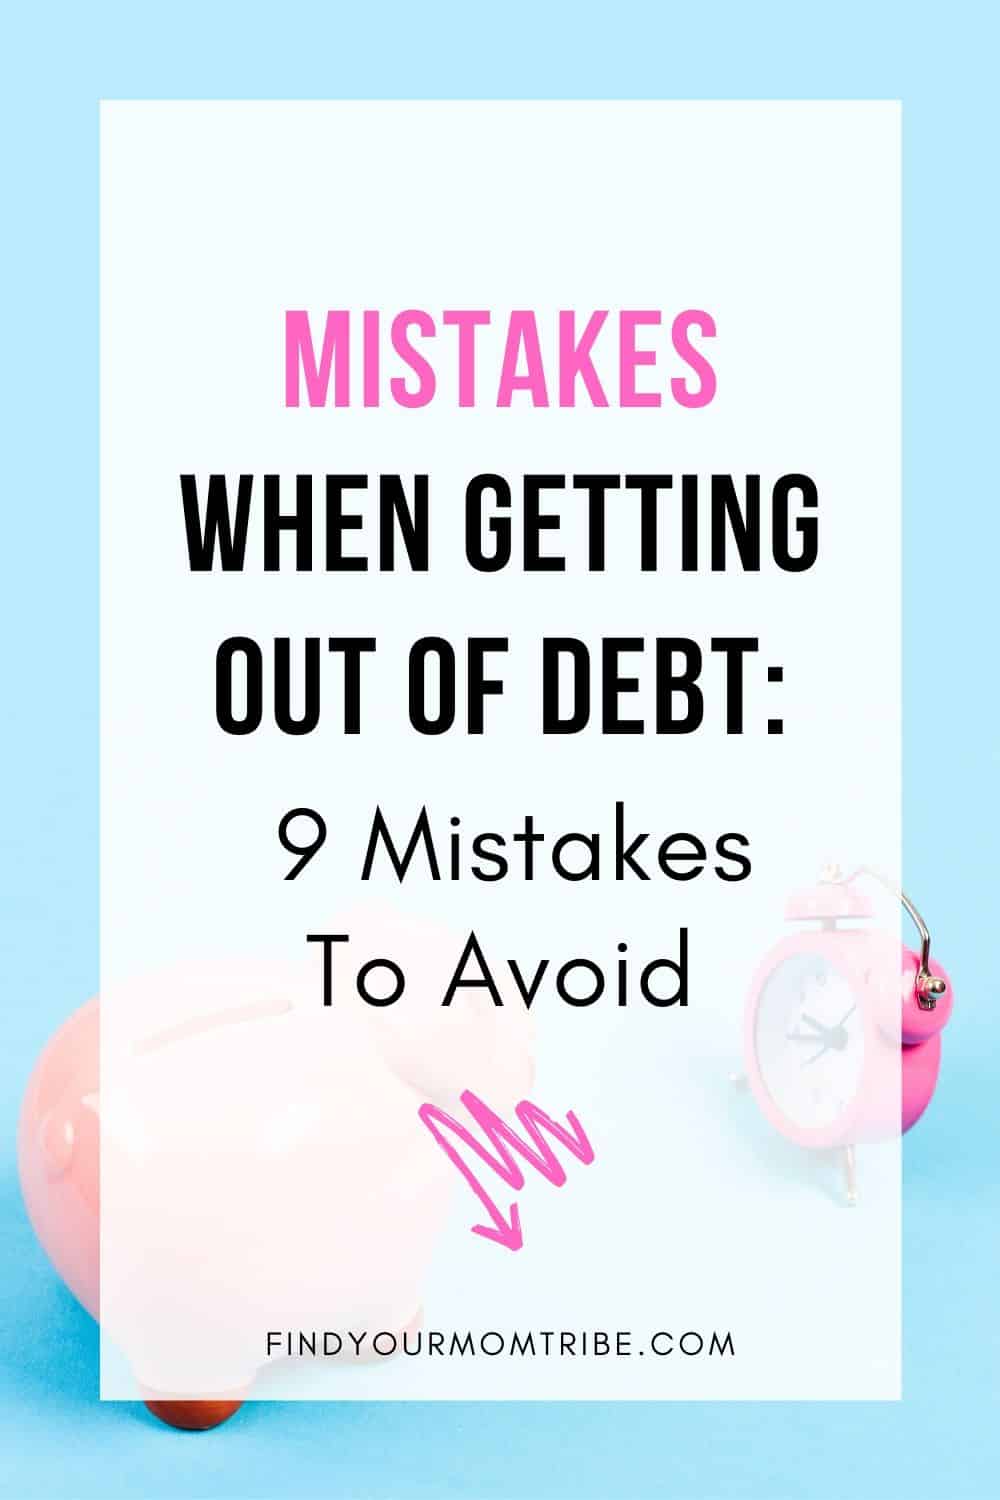 Pinterest Mistakes When Getting Out of Debt